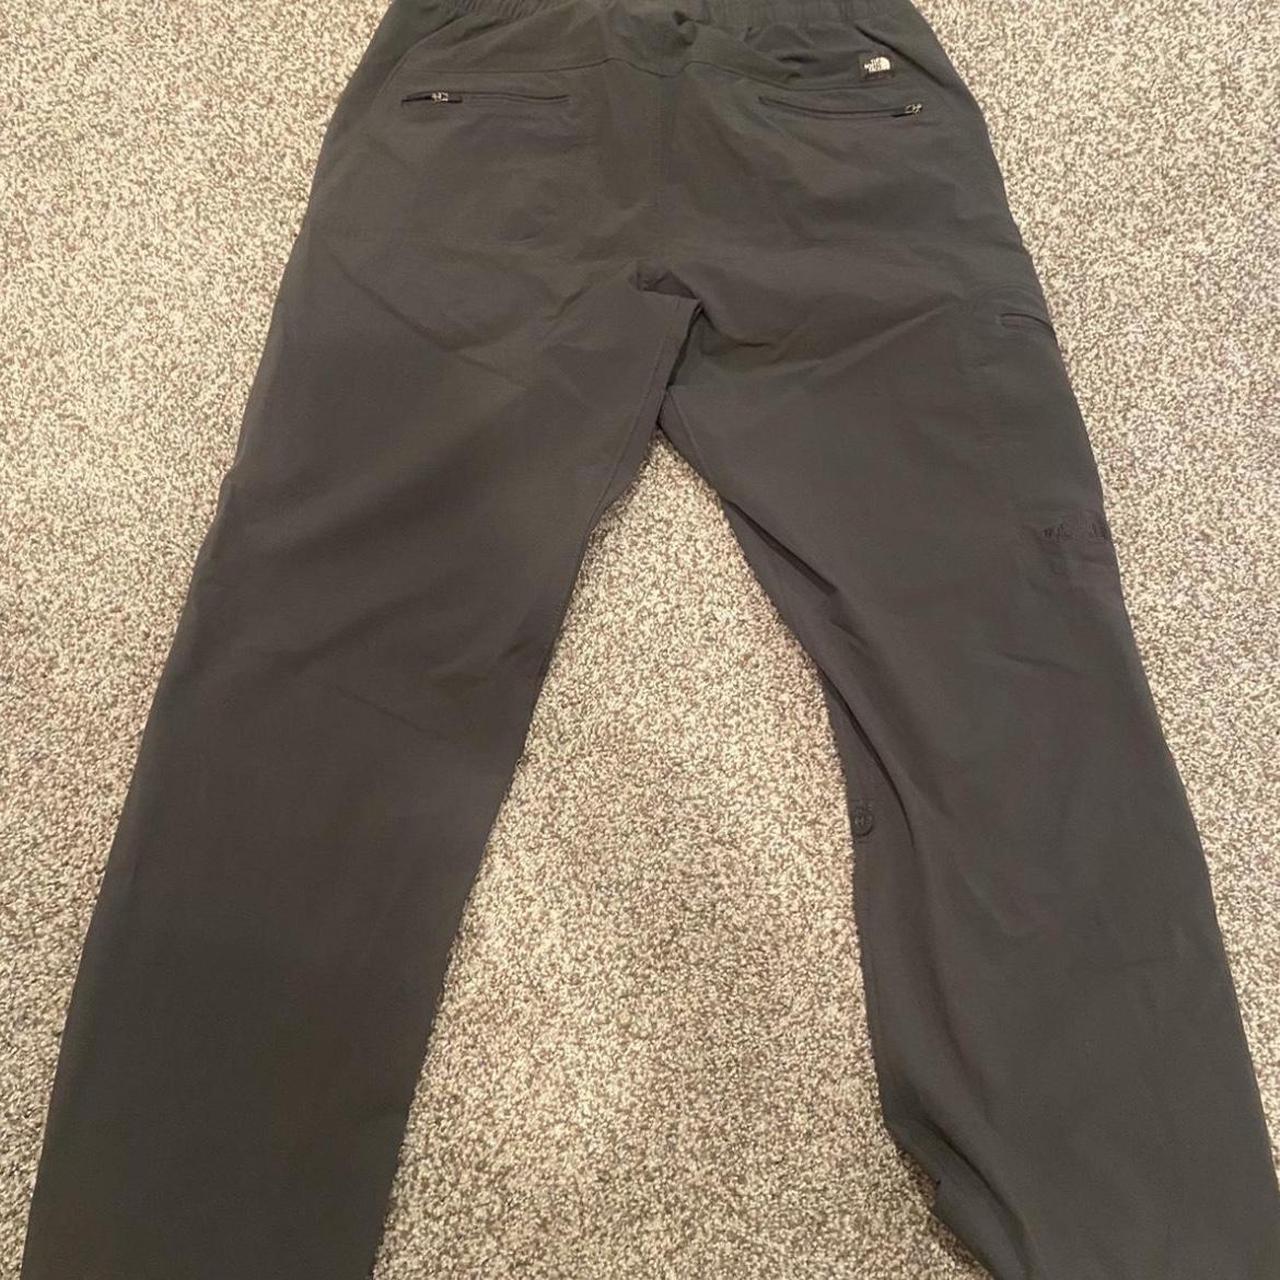 North face hiking pants / these have a really cool... - Depop